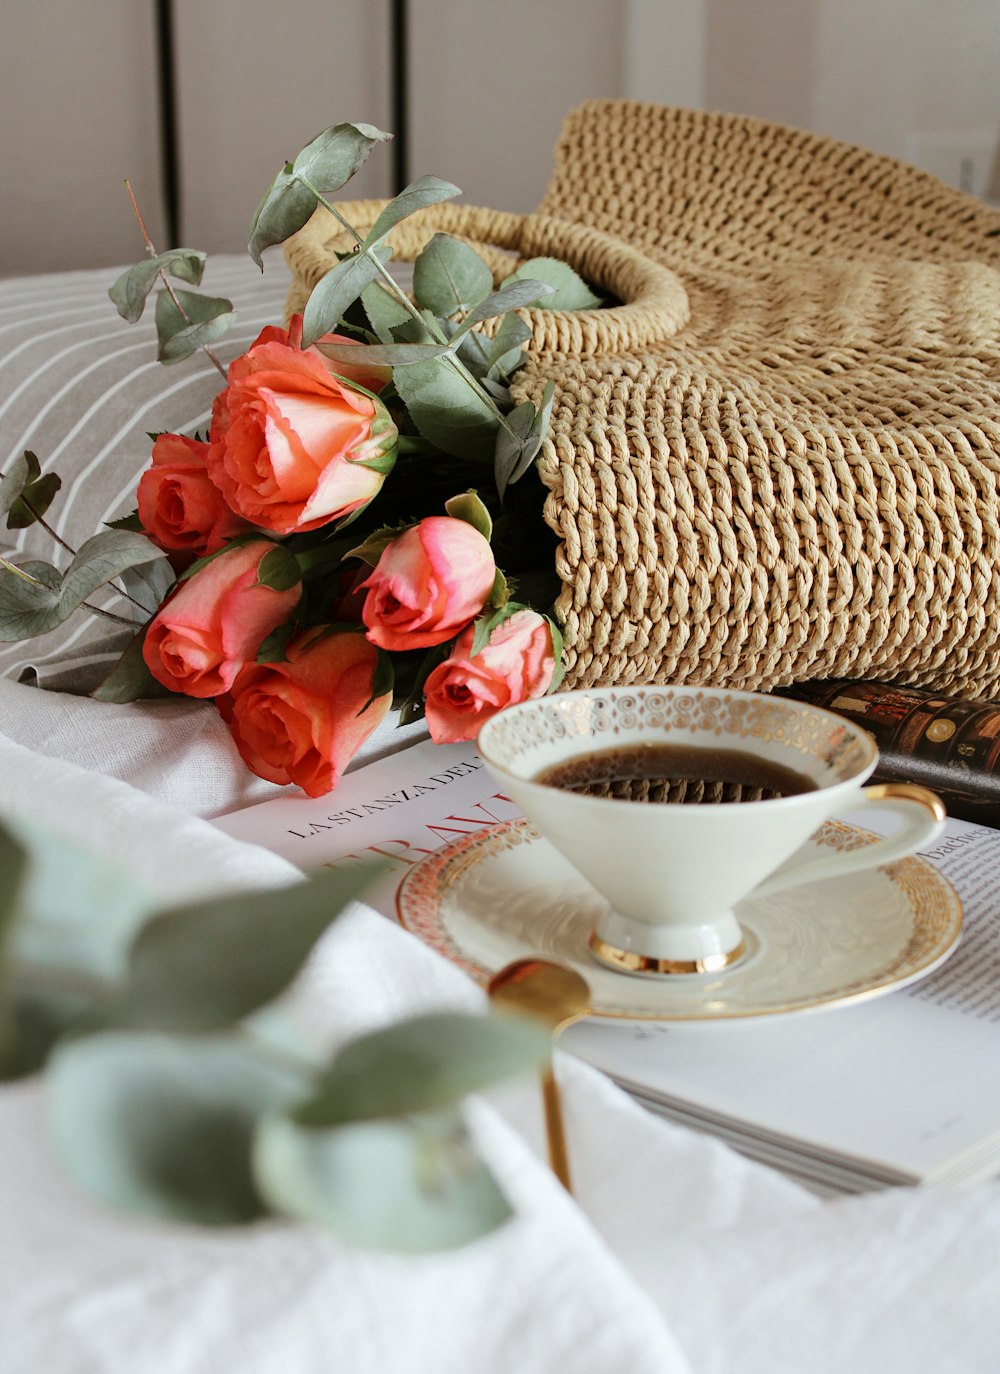 red roses beside white ceramic teacup on white table cloth